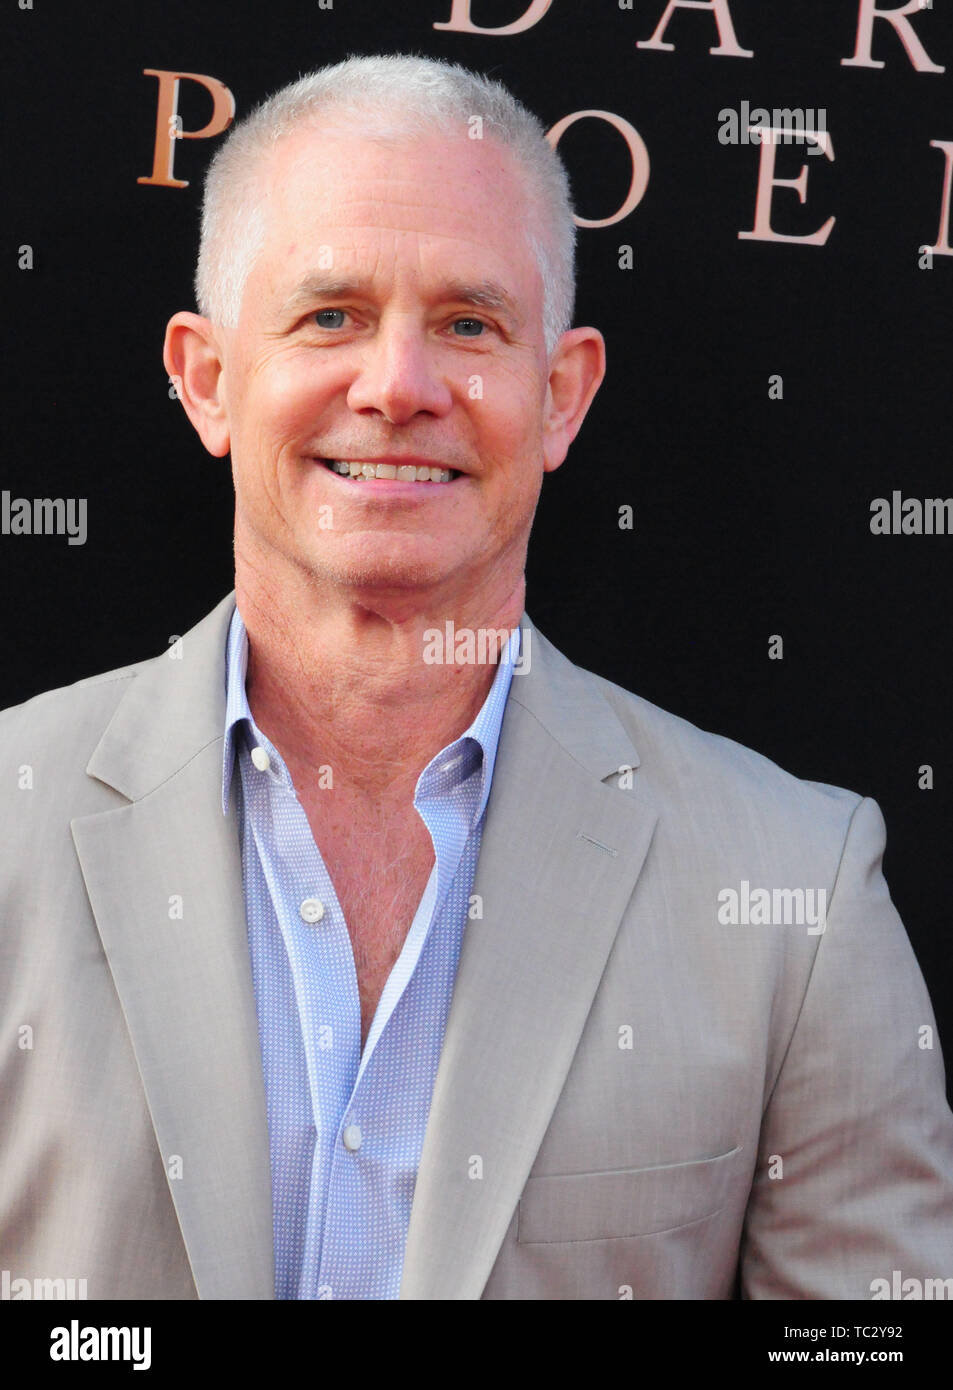 Hollywood, California, USA 4th June 2019 Producer Hutch Parker attends the World Premiere of 20th Century Fox's 'Dark Phoenix' on June 4, 2019 at TCL Chinese Theatre IMAX in Hollywood, California, USA. Photo by Barry King/Alamy Live News Stock Photo